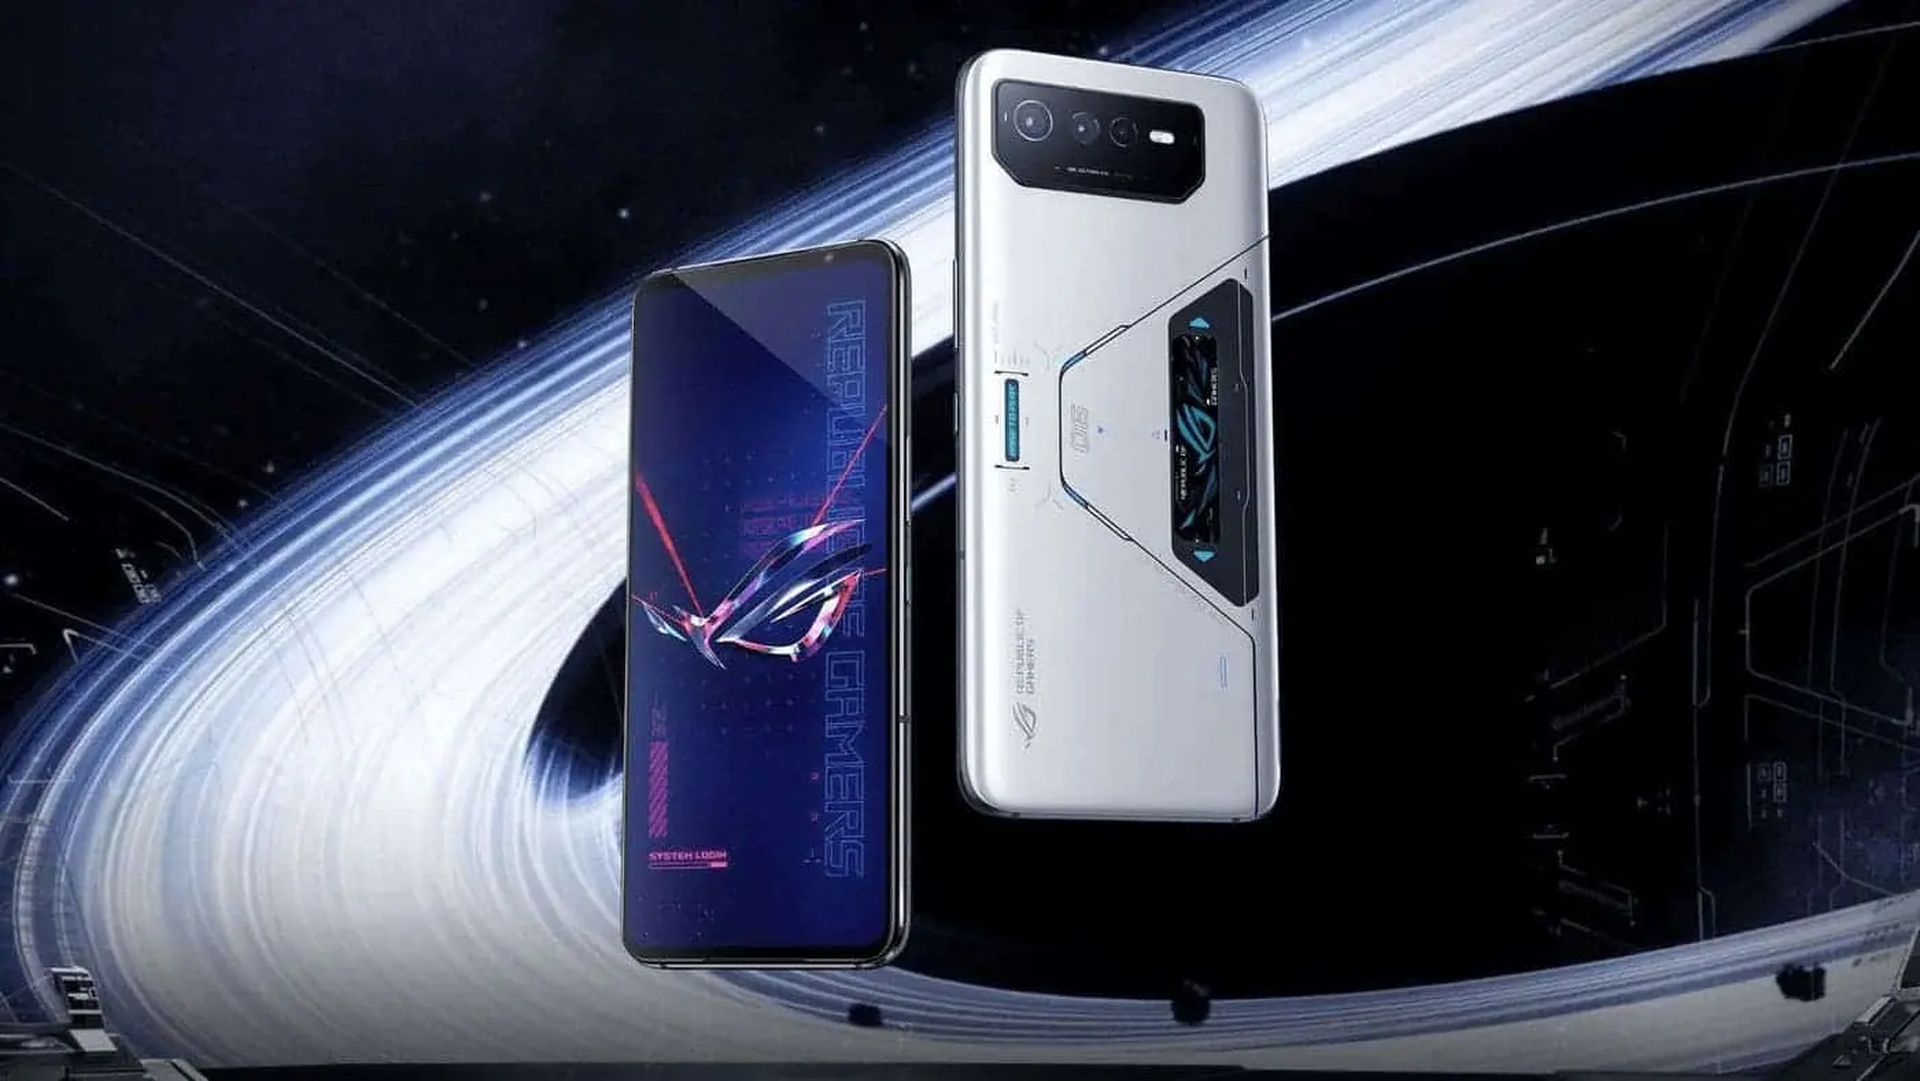 ROG Phone 6D and 6D Ultimate are on their way to hit the market, and we'll cover all there is to know including specs, price, and release date in this article.